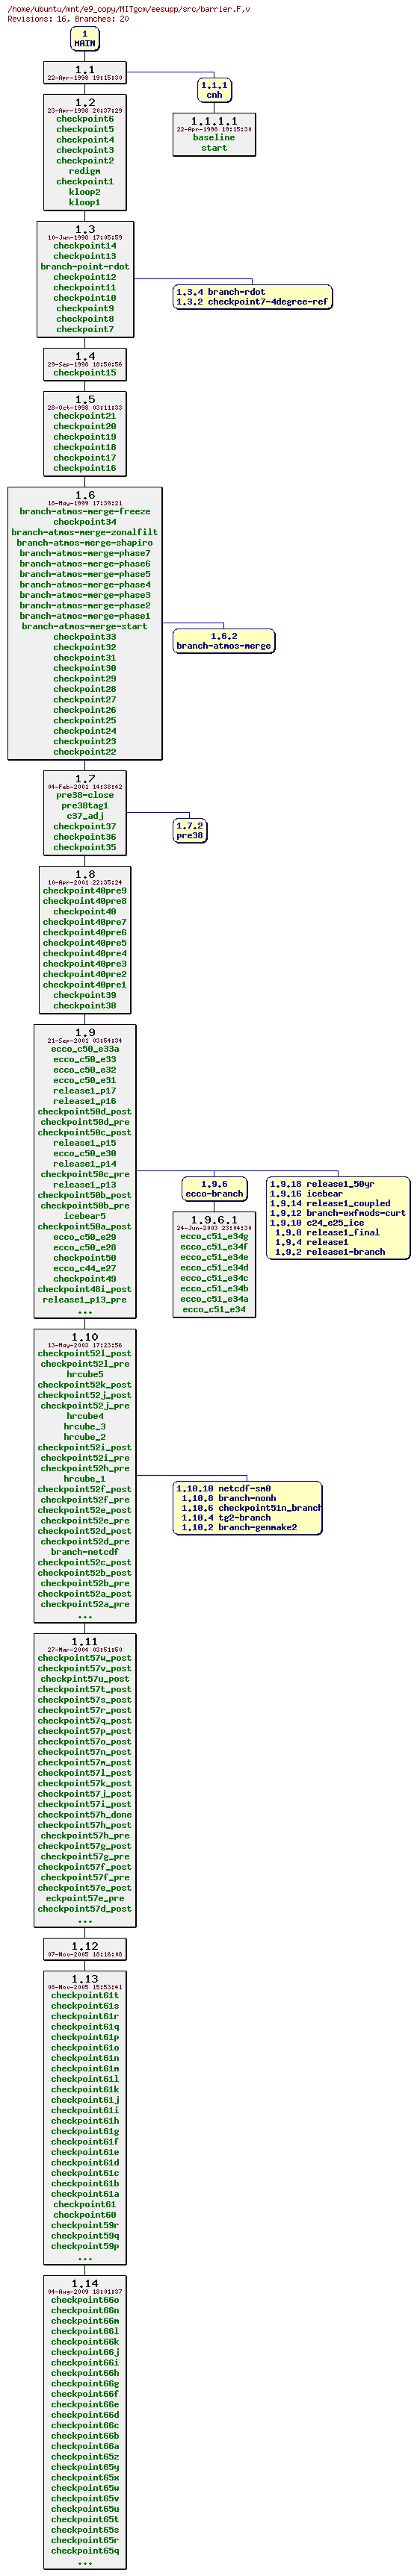 Revisions of MITgcm/eesupp/src/barrier.F